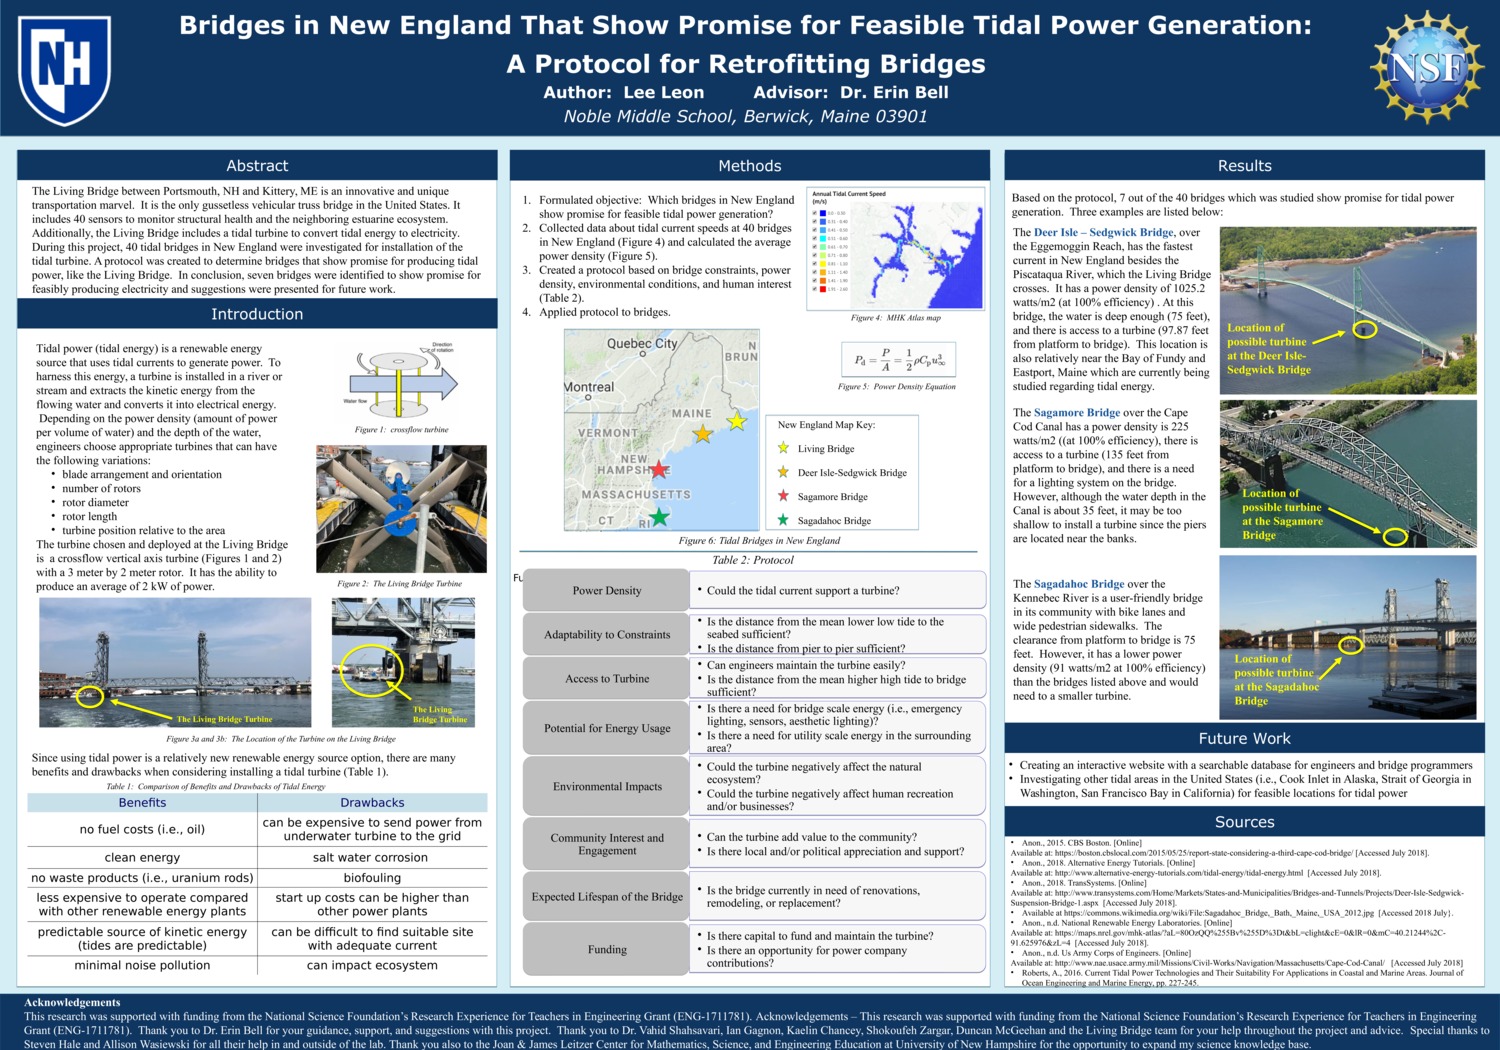 Bridges In New England That Show Promise For Feasible Tidal Power Generation: A Protocol For Retrofitting Bridges by lmz525